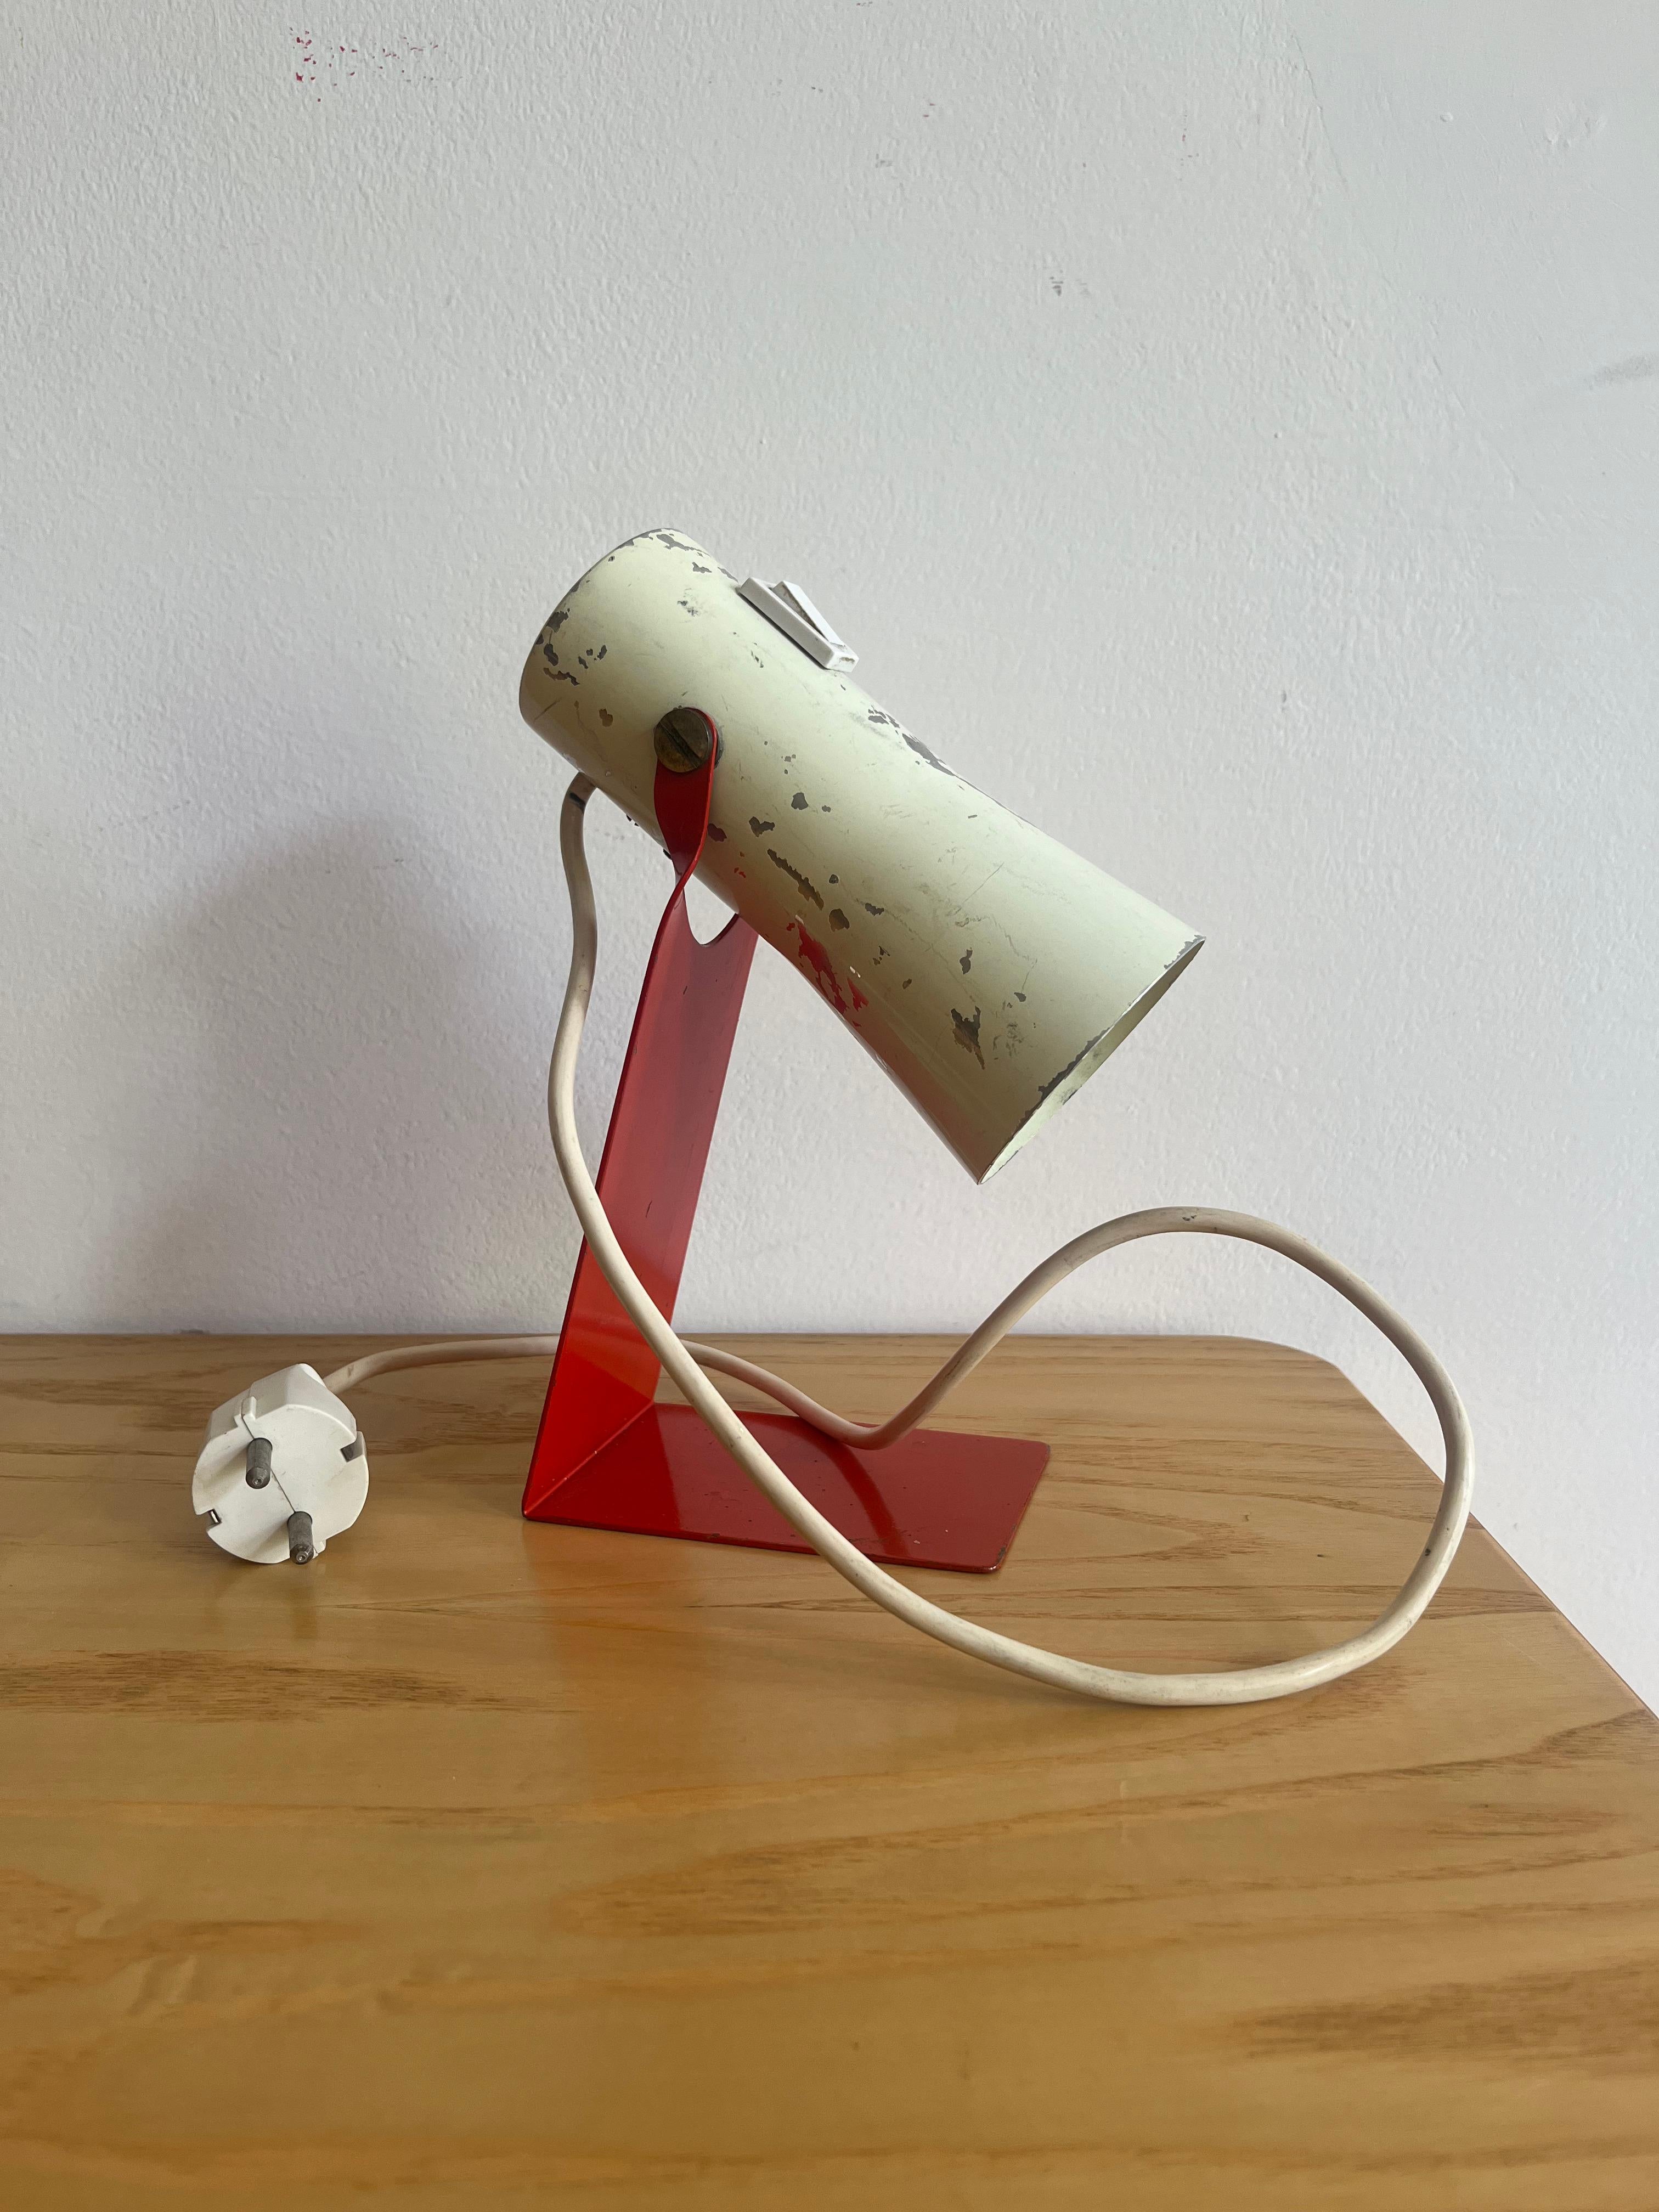 Small table lamp designed by Philips study center and produced by Philips in 1971.

The lamp is made of lacquered metal with a red base and white cap. As pictured has several discolorations and lack of color although the frame and mechanism are